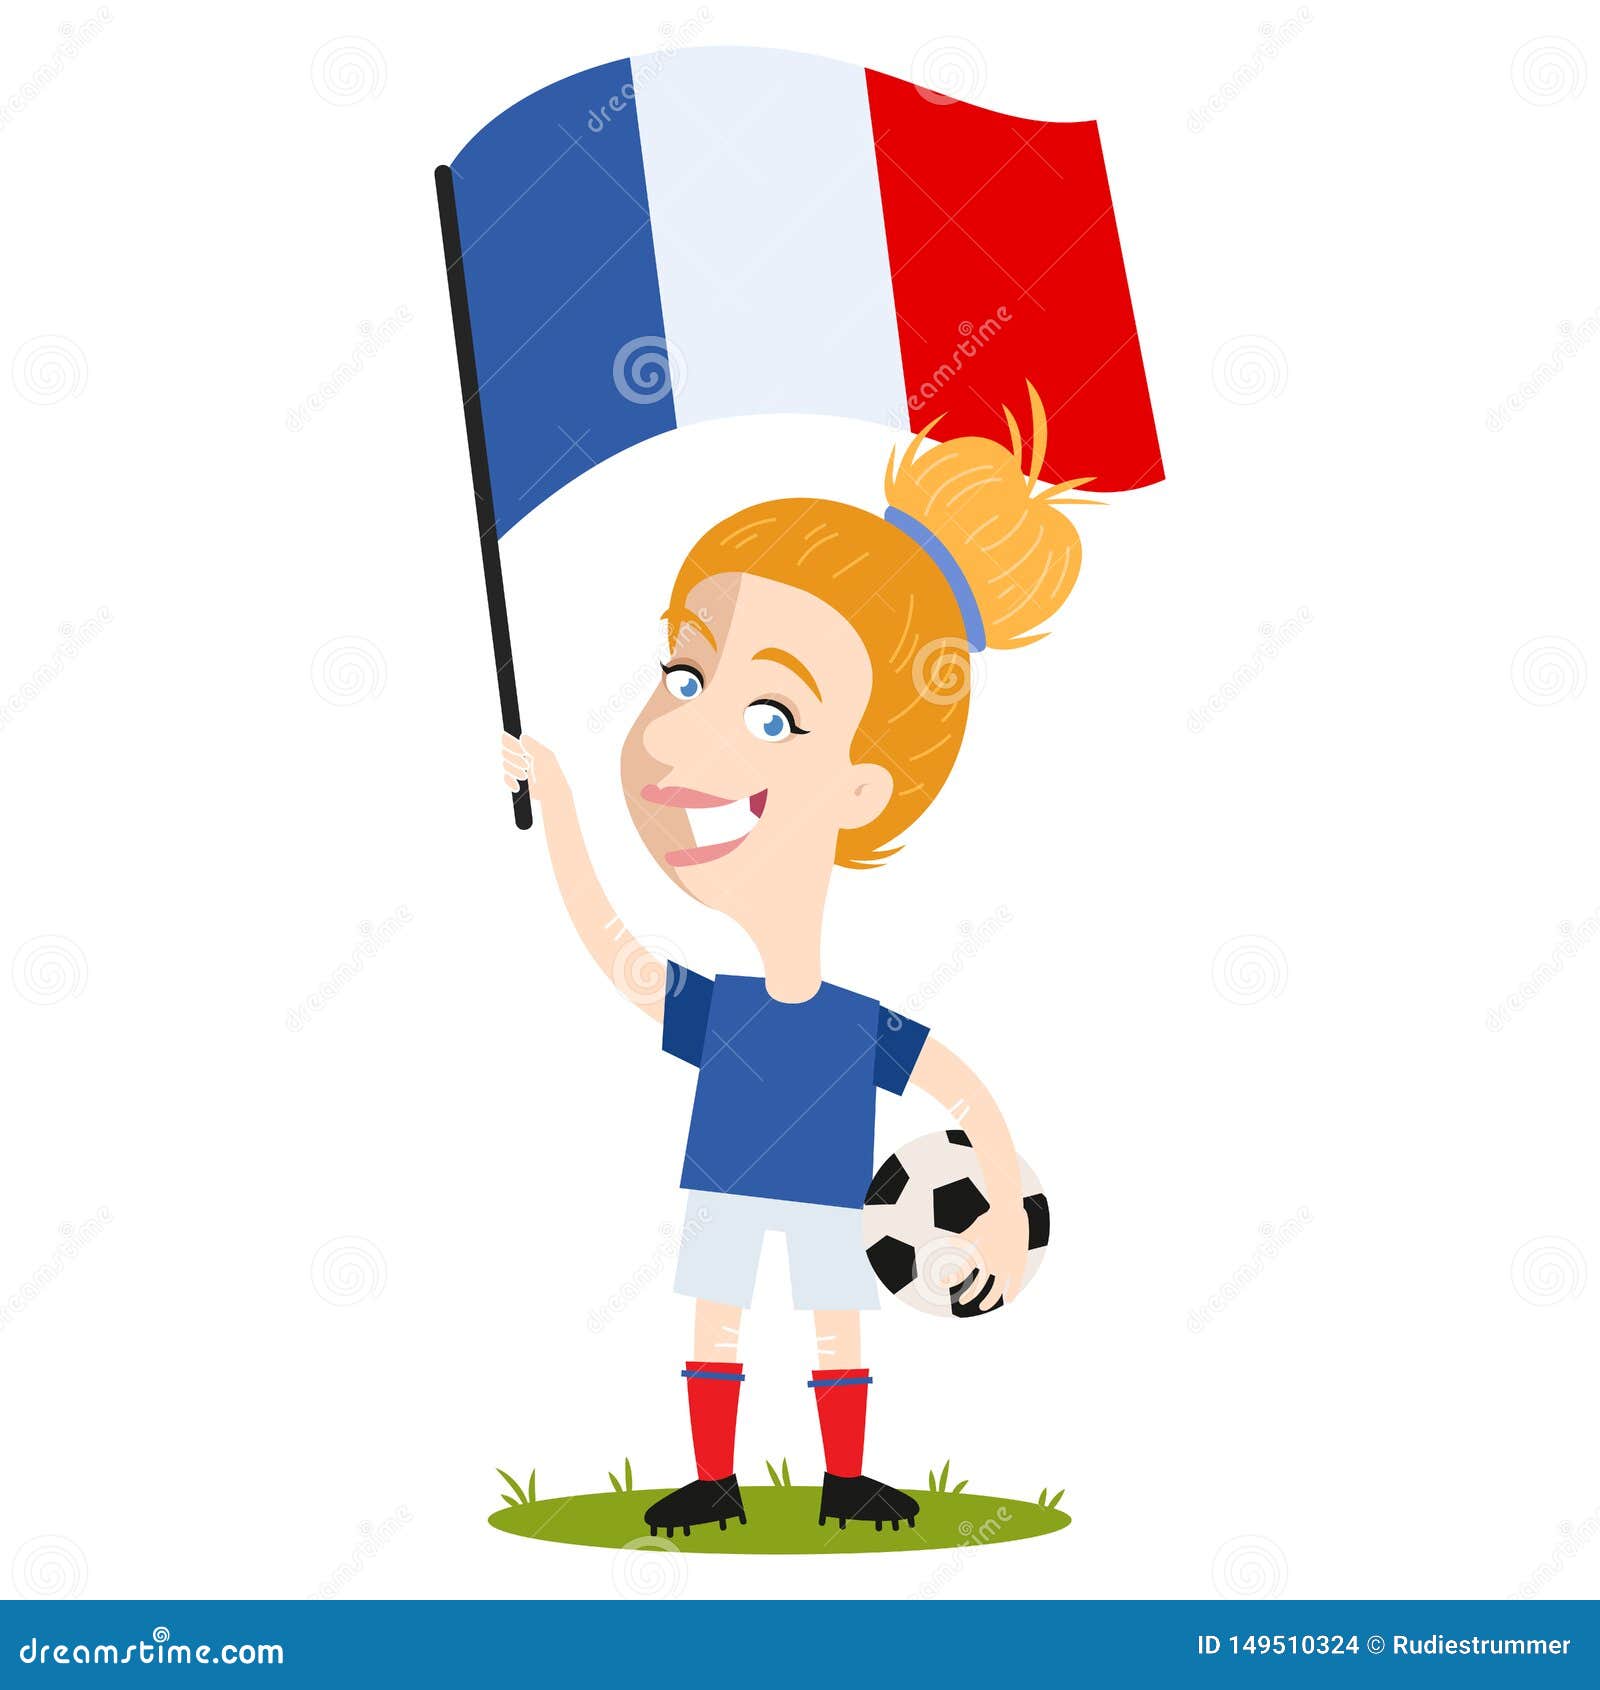 Women`s Football, Female Player for France, Cartoon Woman Holding French  Flag Wearing Blue Shirt and White Shorts Stock Vector - Illustration of  footballer, cleats: 149510324